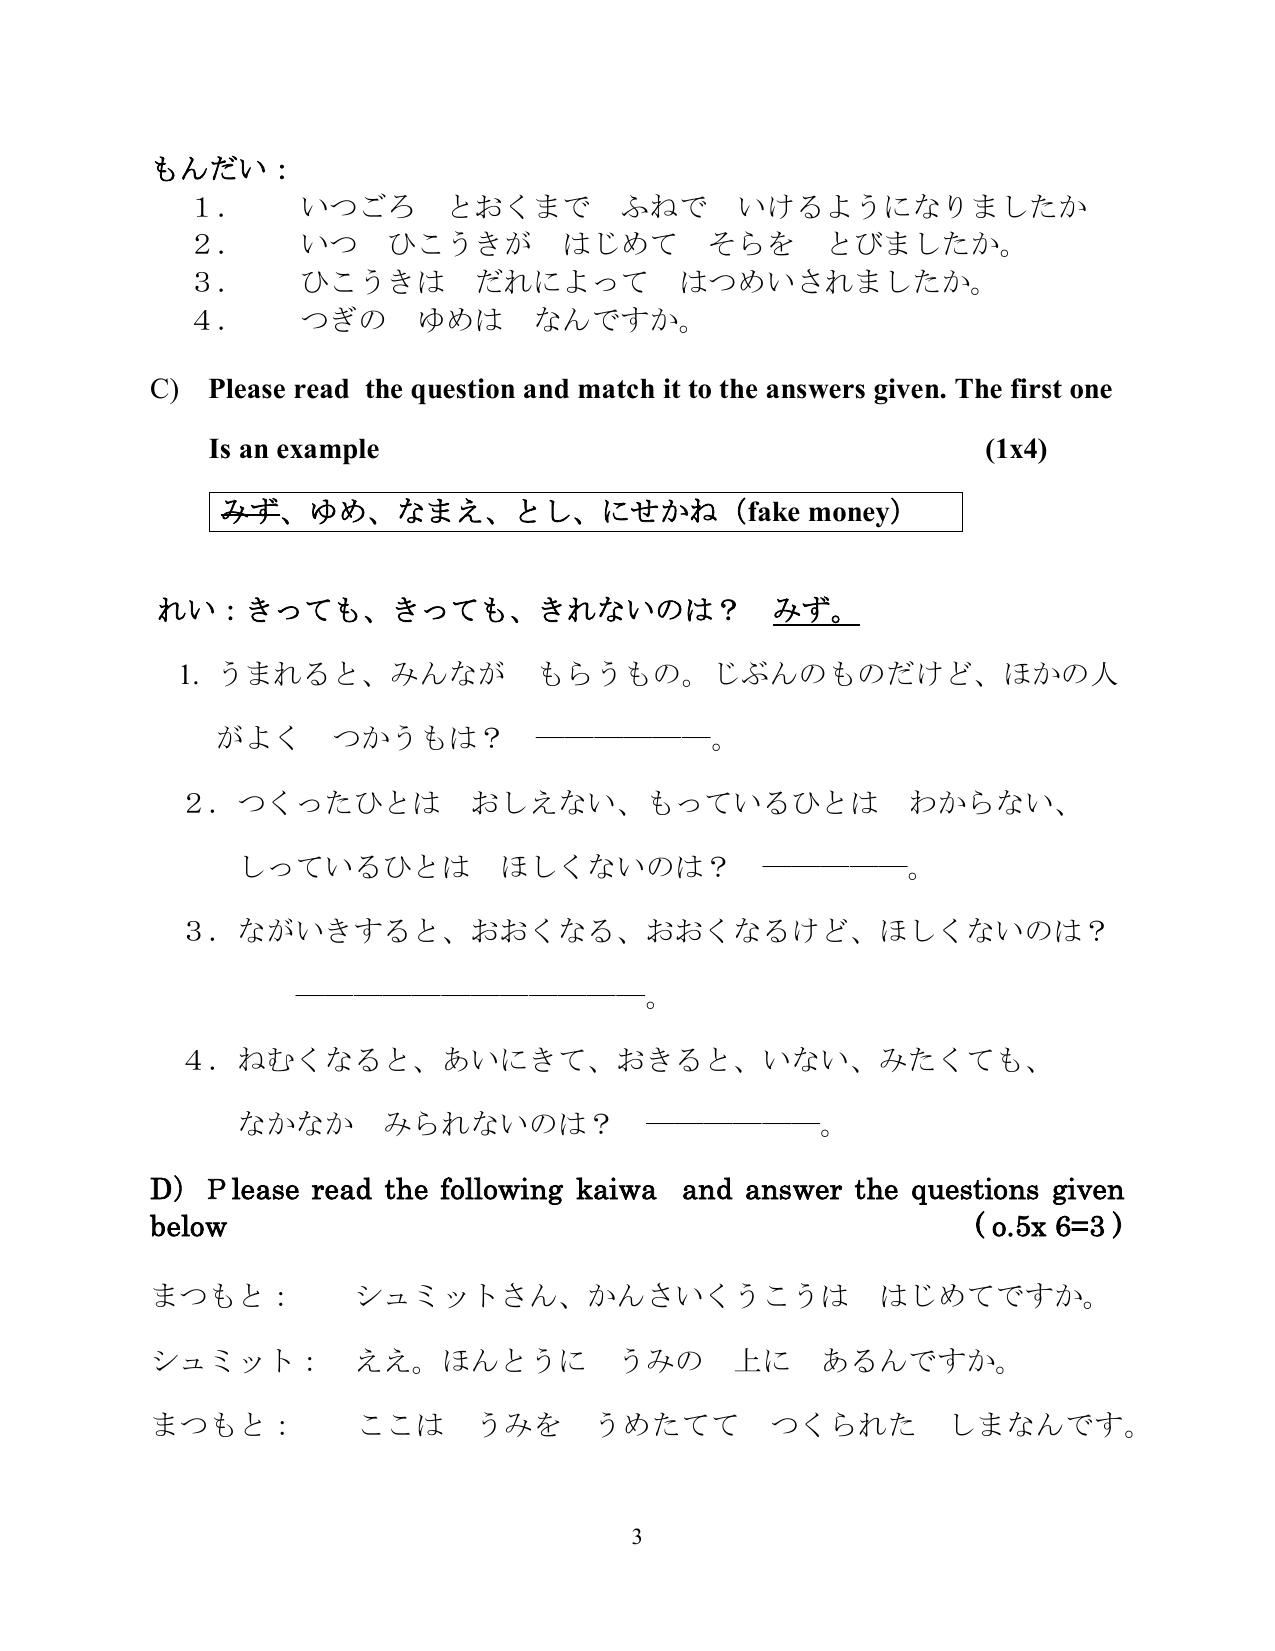 CBSE Class 12 Japanese -Sample Paper 2019-20 - Page 3